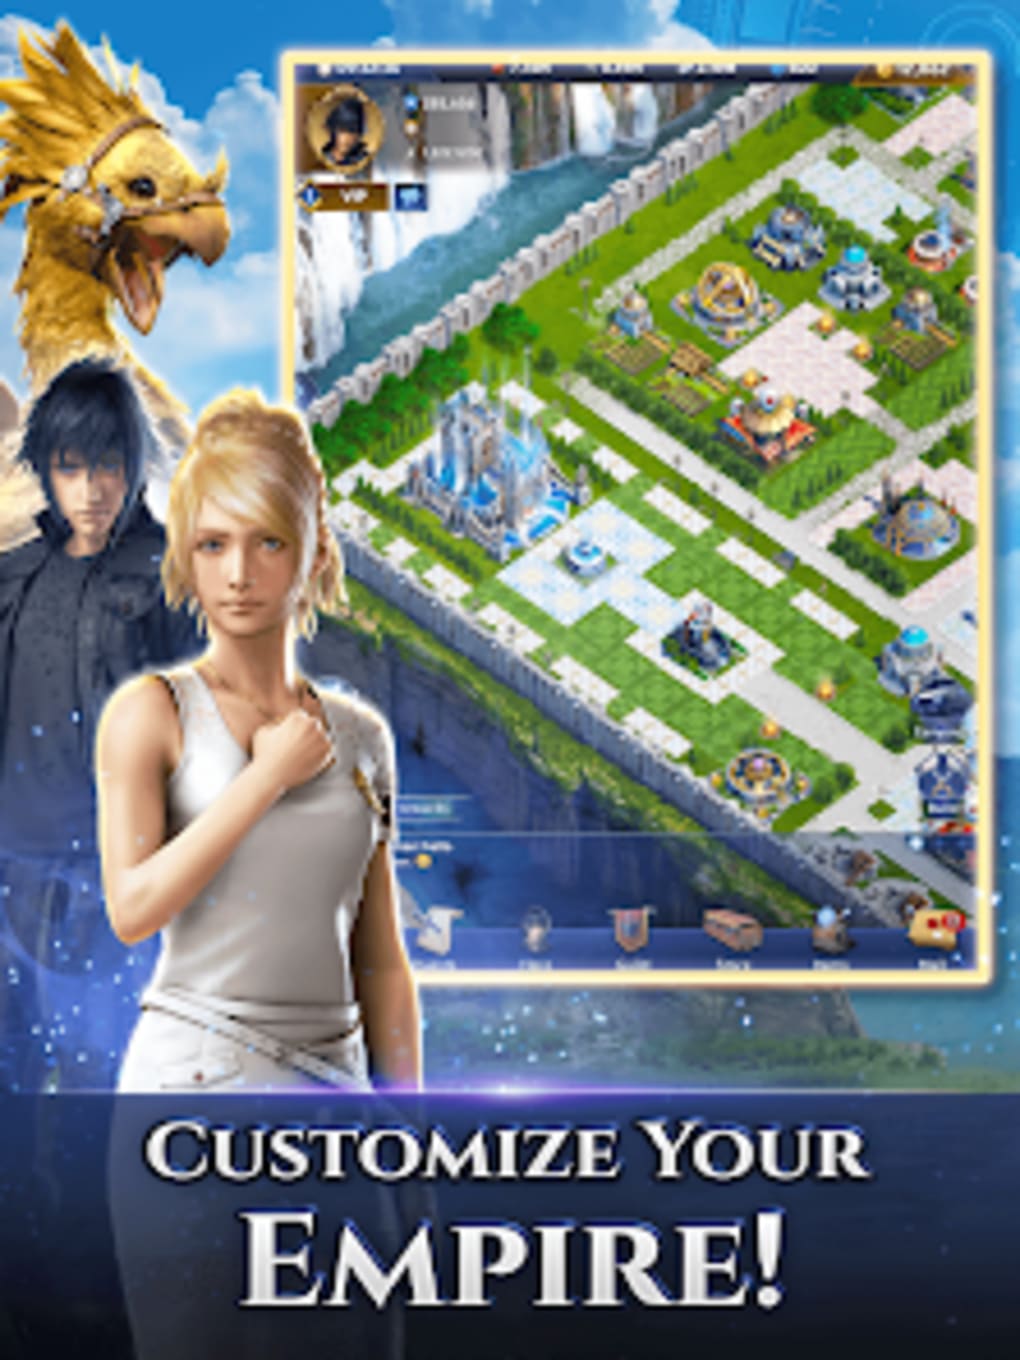 Final Fantasy XV: War for Eos - Apps on Google Play